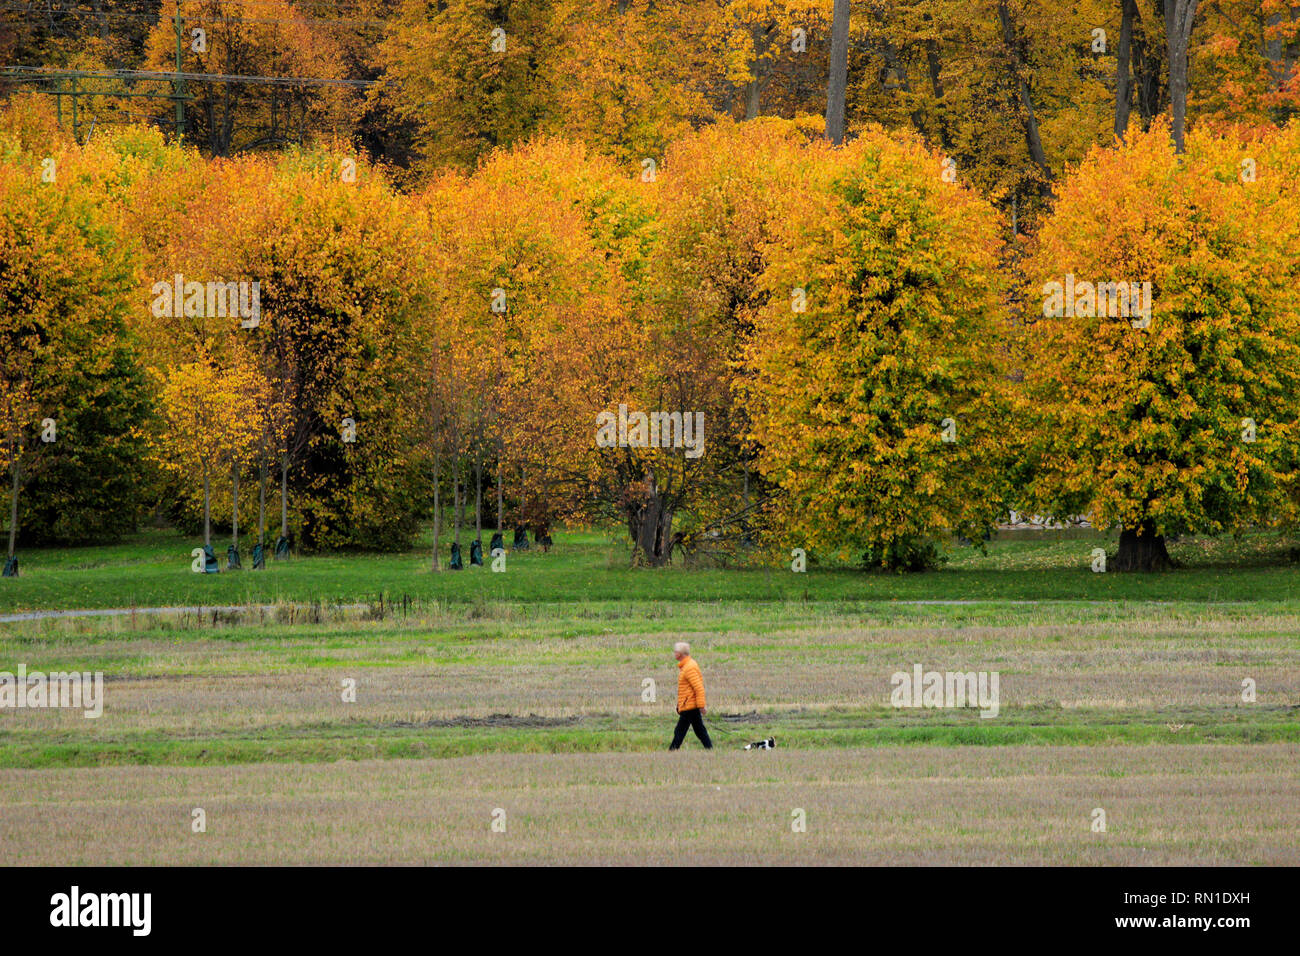 Man walking with his dog, gazing at the surrounding warm coloured foliage landscape of Barockparken.Upplands Vasby, Sweden Stock Photo